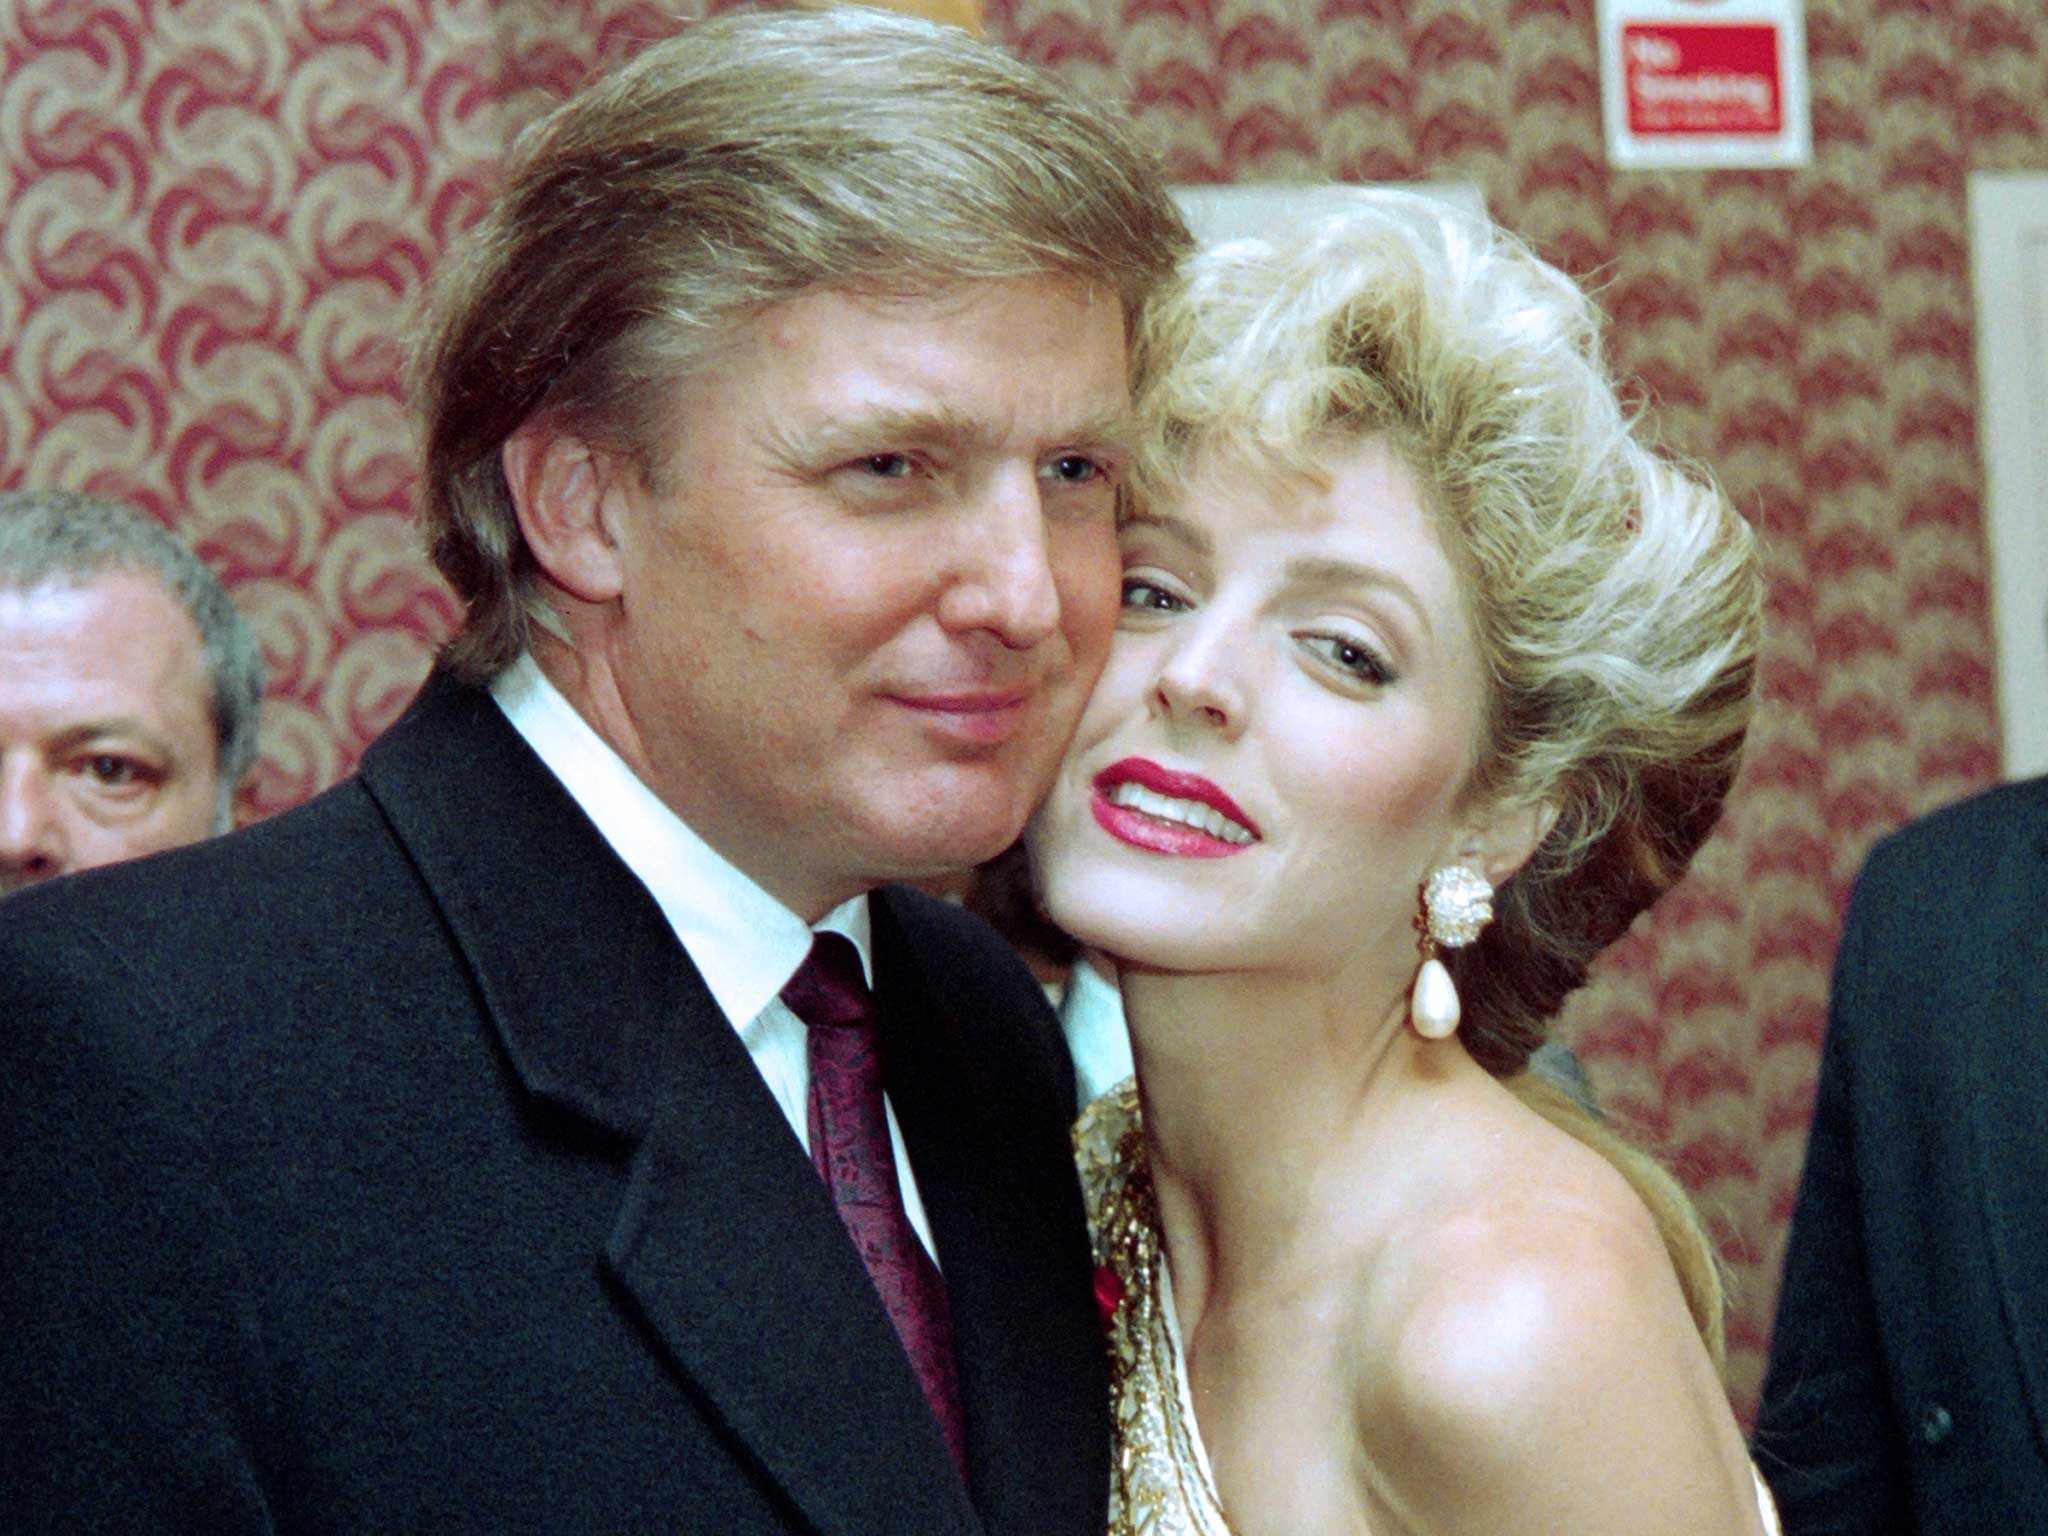 Donald Trump with his second wife Marla Maples in 1993.